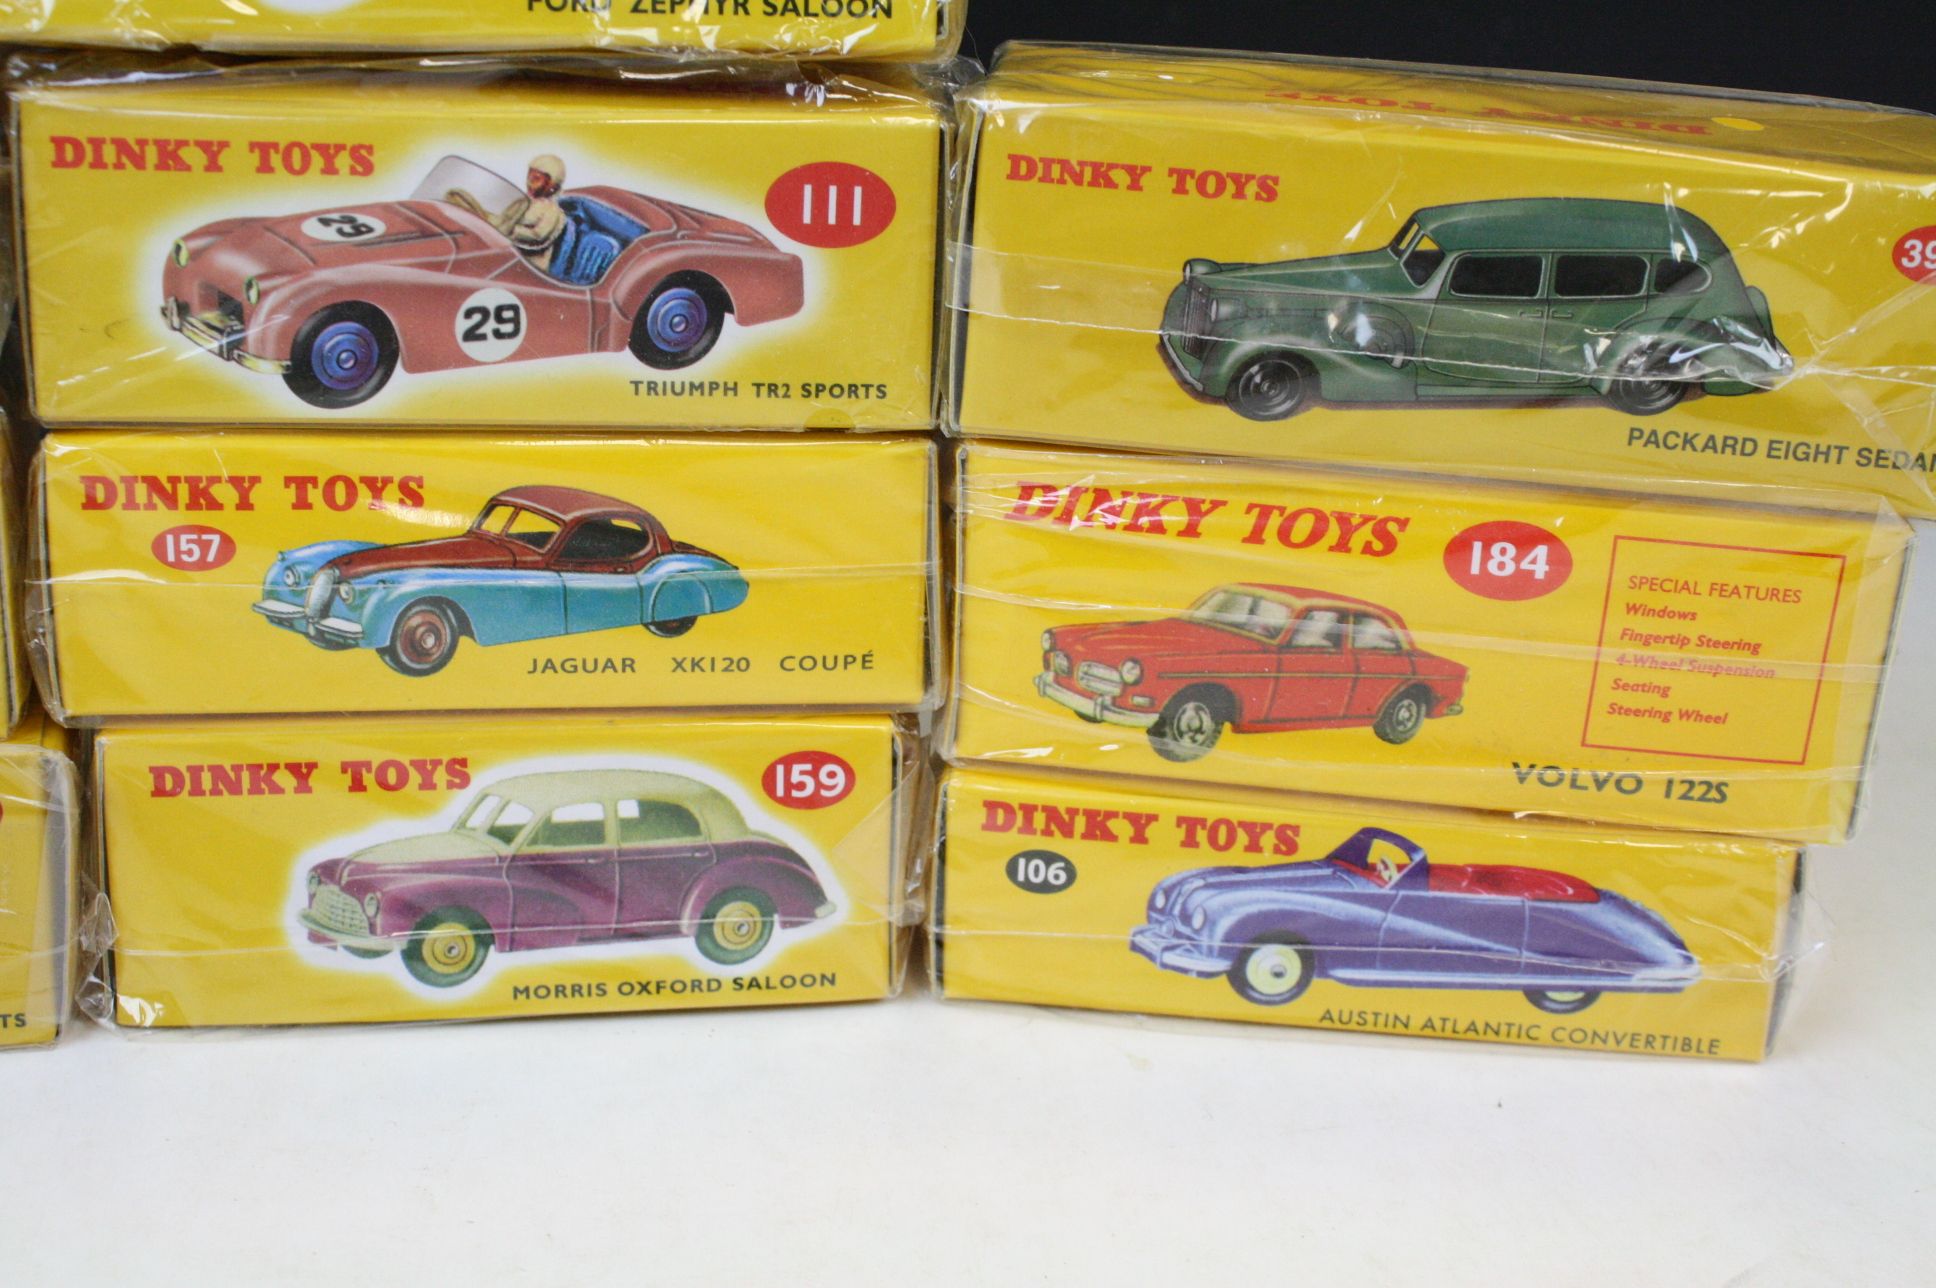 13 boxed Dinky Atlas Editions diecast models, all sealed, to include 23D Auto Union Racing Car, - Image 4 of 4